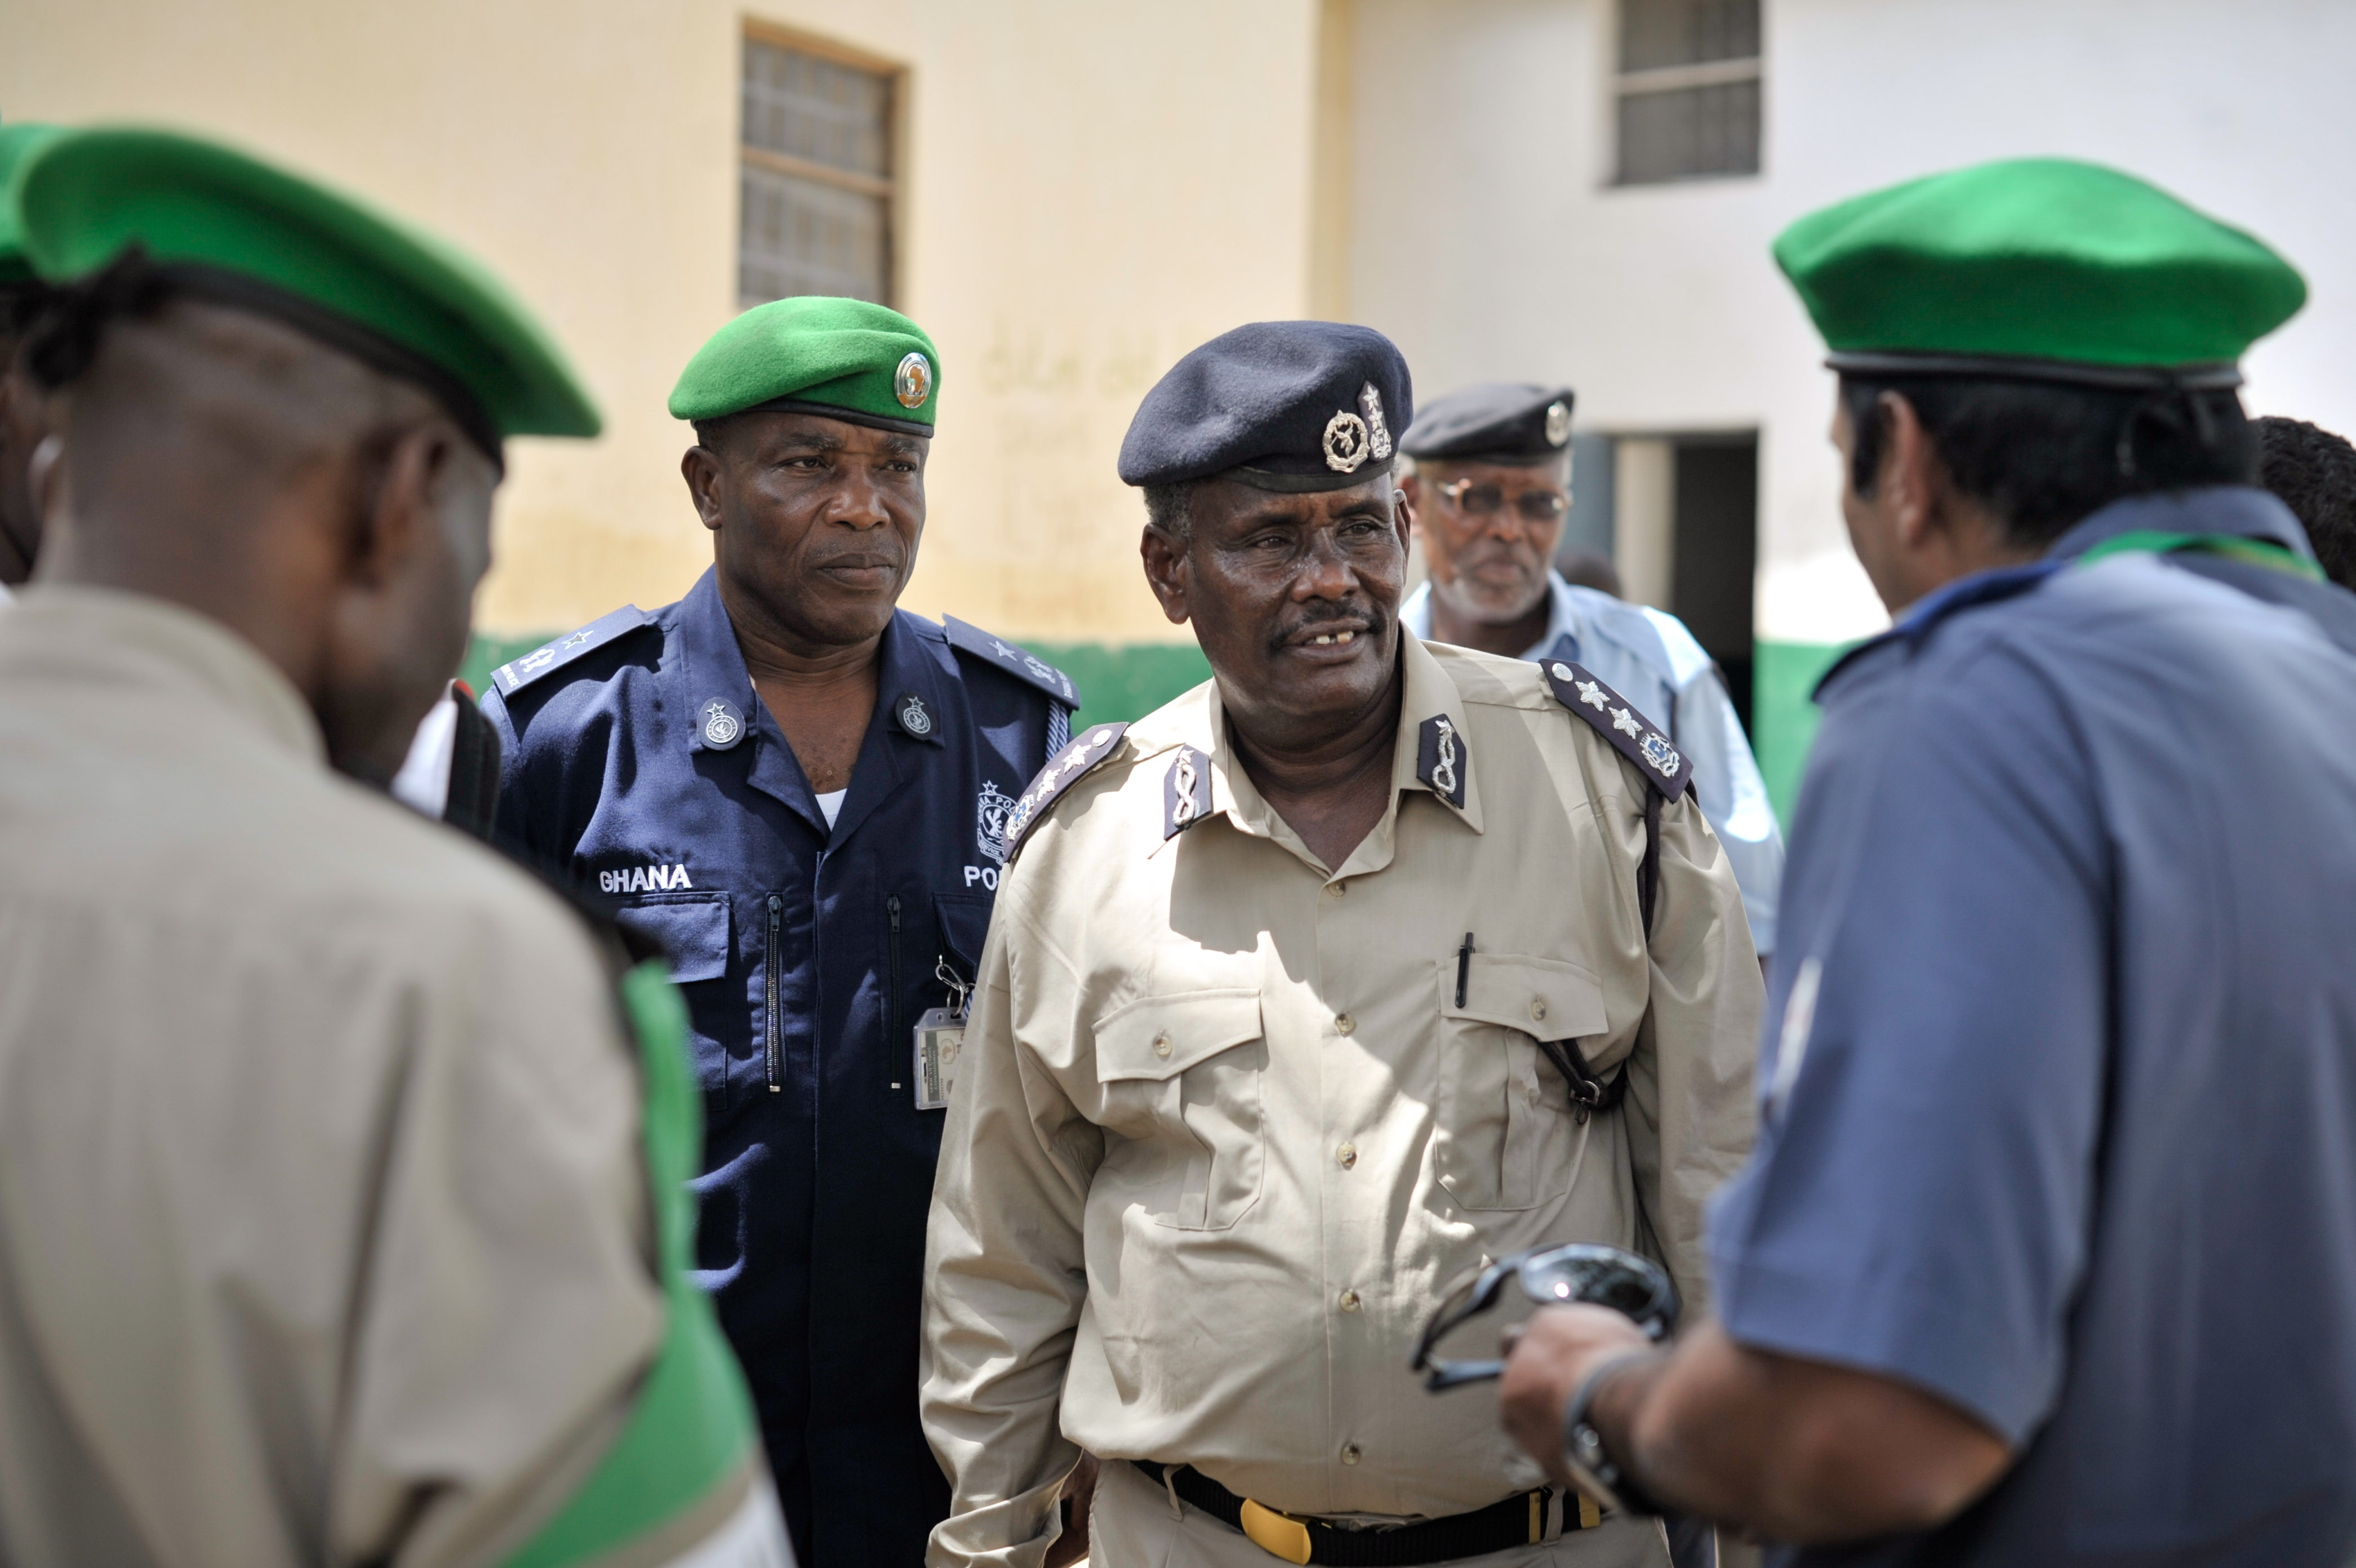 AMISOM Deputy Force Commander, Major General Geoffrey Baraba Muheesi, and AMISOM's new Police Commissioner, Anand Pillay, visit Baidoa, Somalia, on June 20. The two AMISOM officials were received by (14466427674)